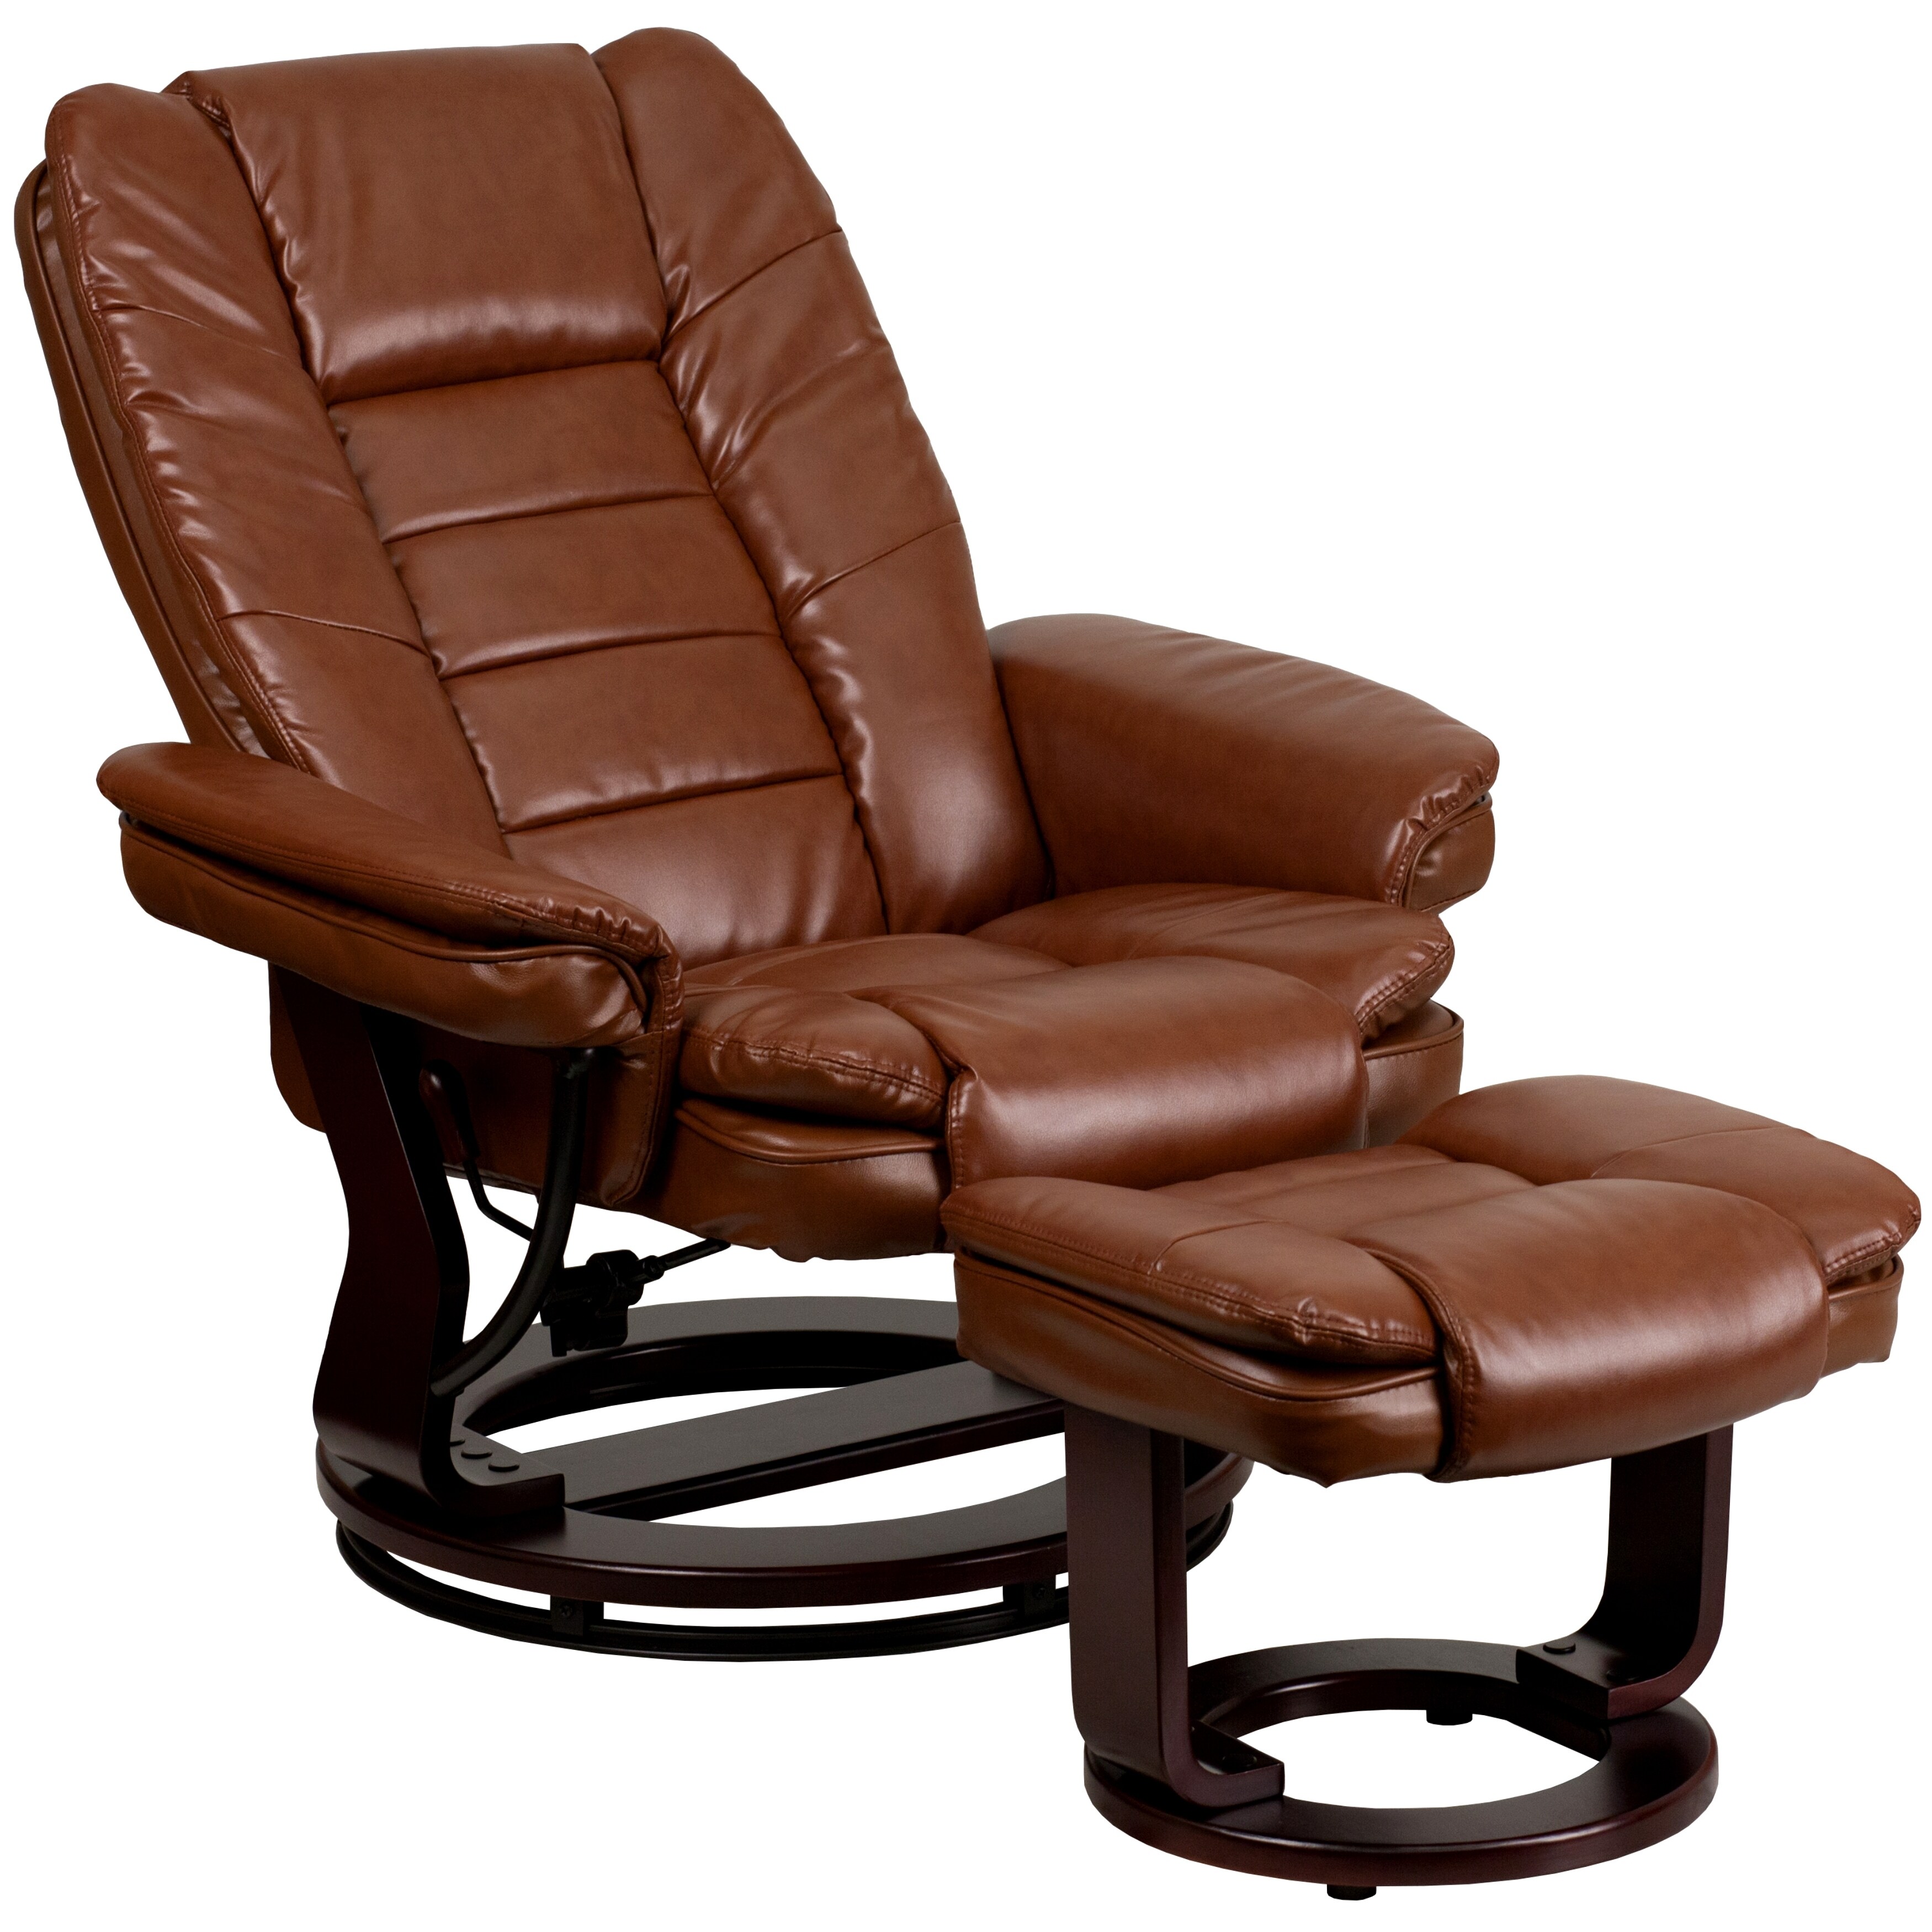 Shop Etin Antique Brown Leather And Mahogany Wood Swivel Recliner